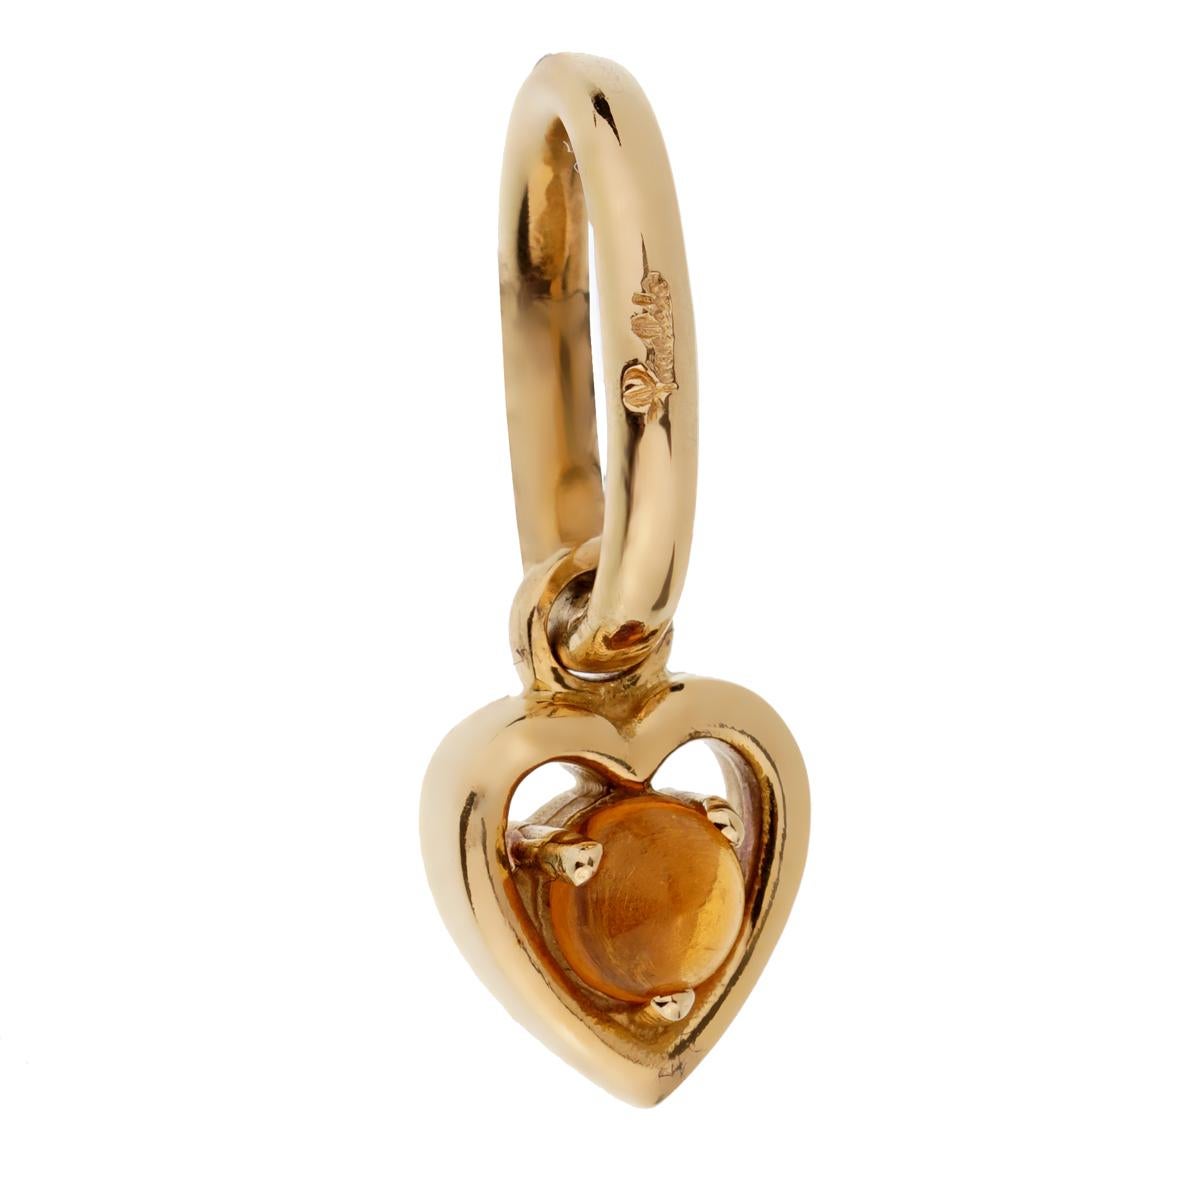 A chic brand new Pomellato charm pendant featuring a .30ct citrine set in 18k yellow gold. 

Sku: 2218